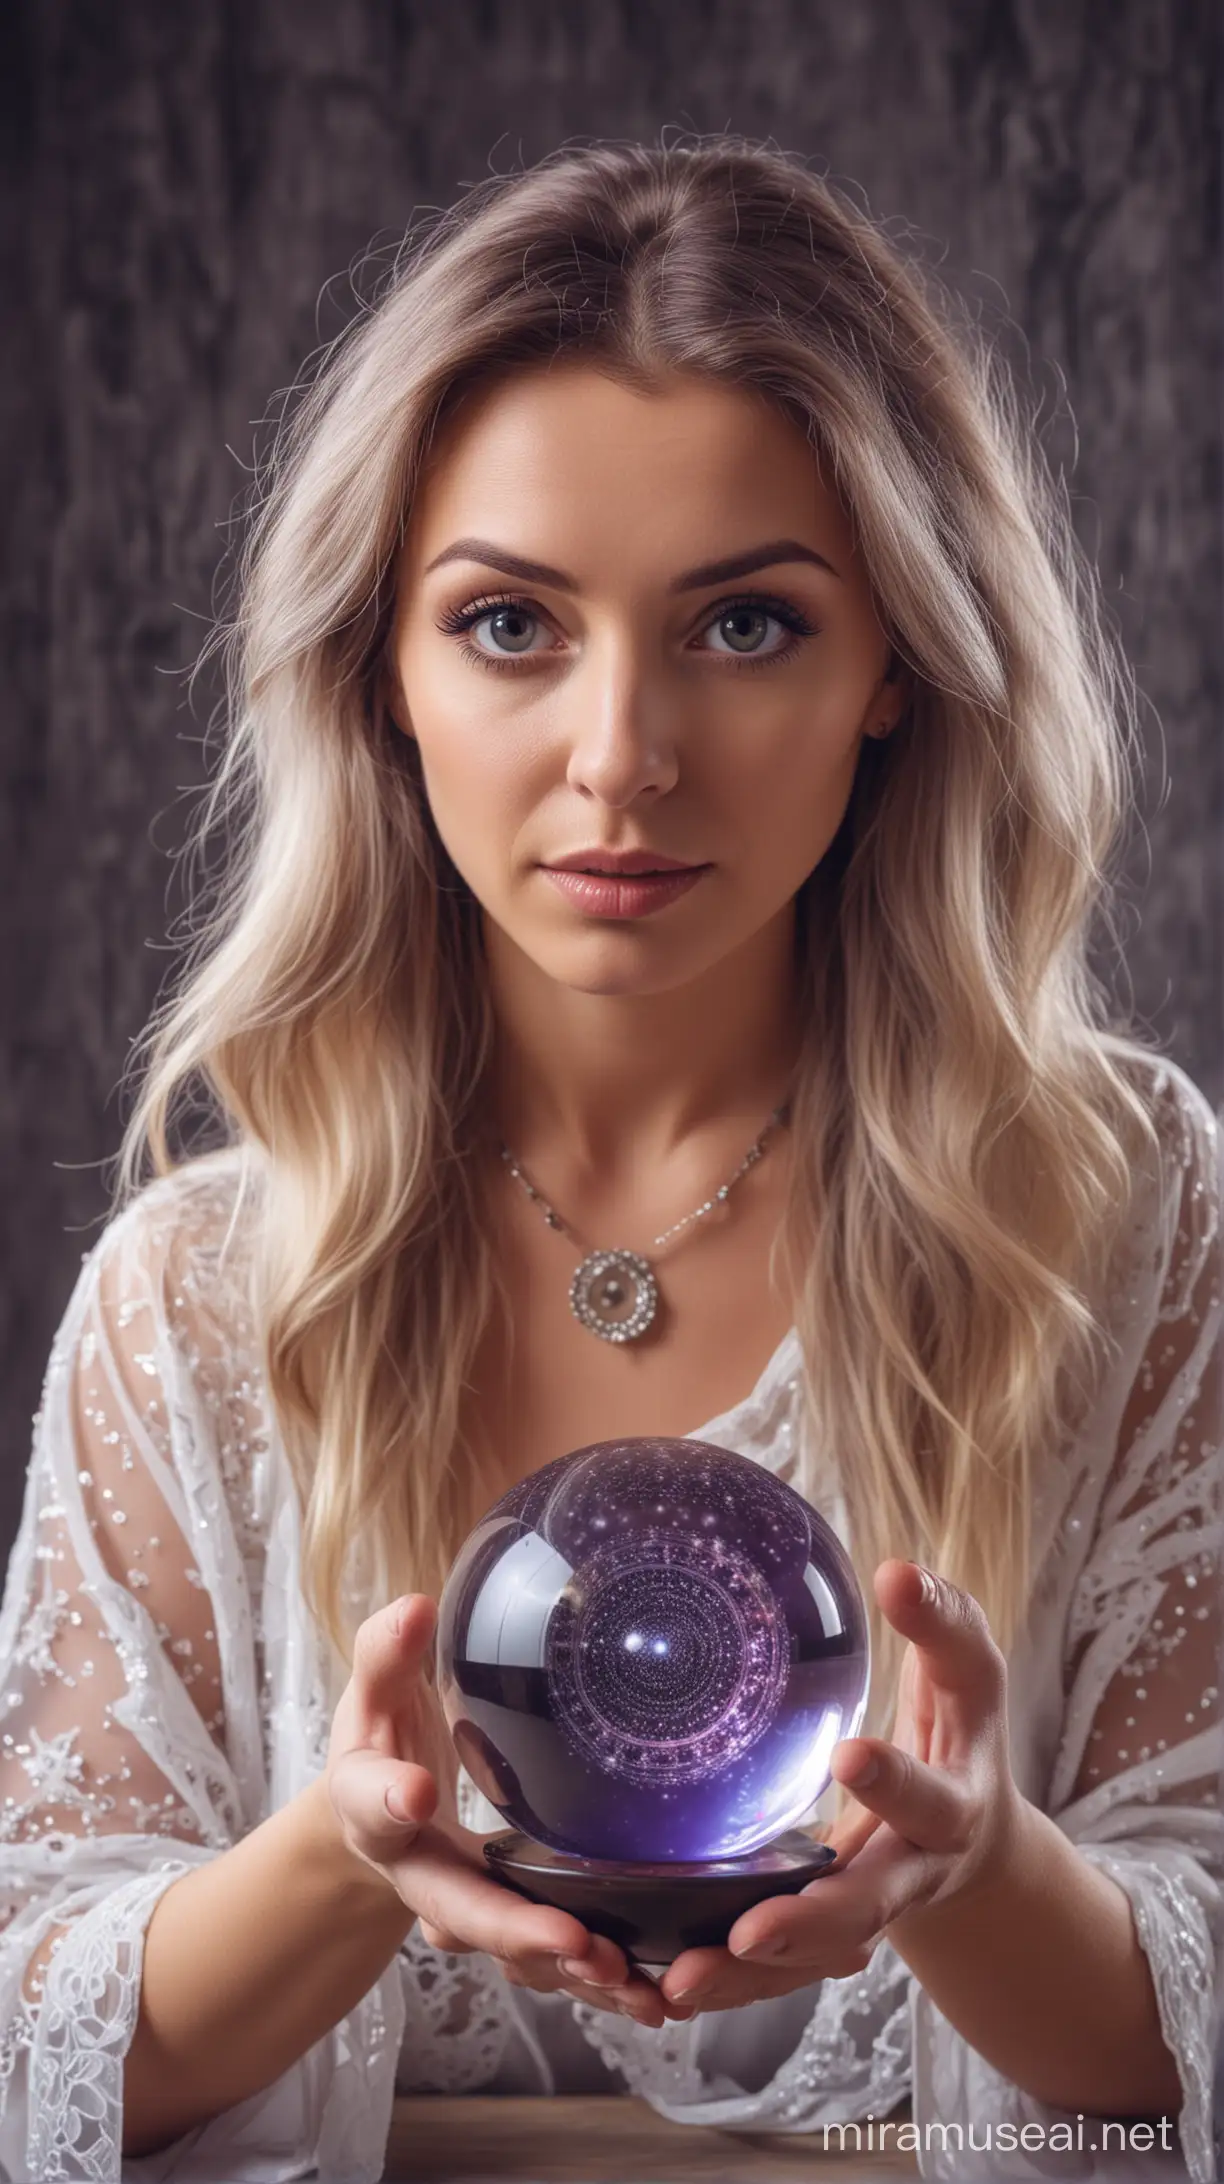 Psychic Woman Gazing into Crystal Ball Foreseeing the Future